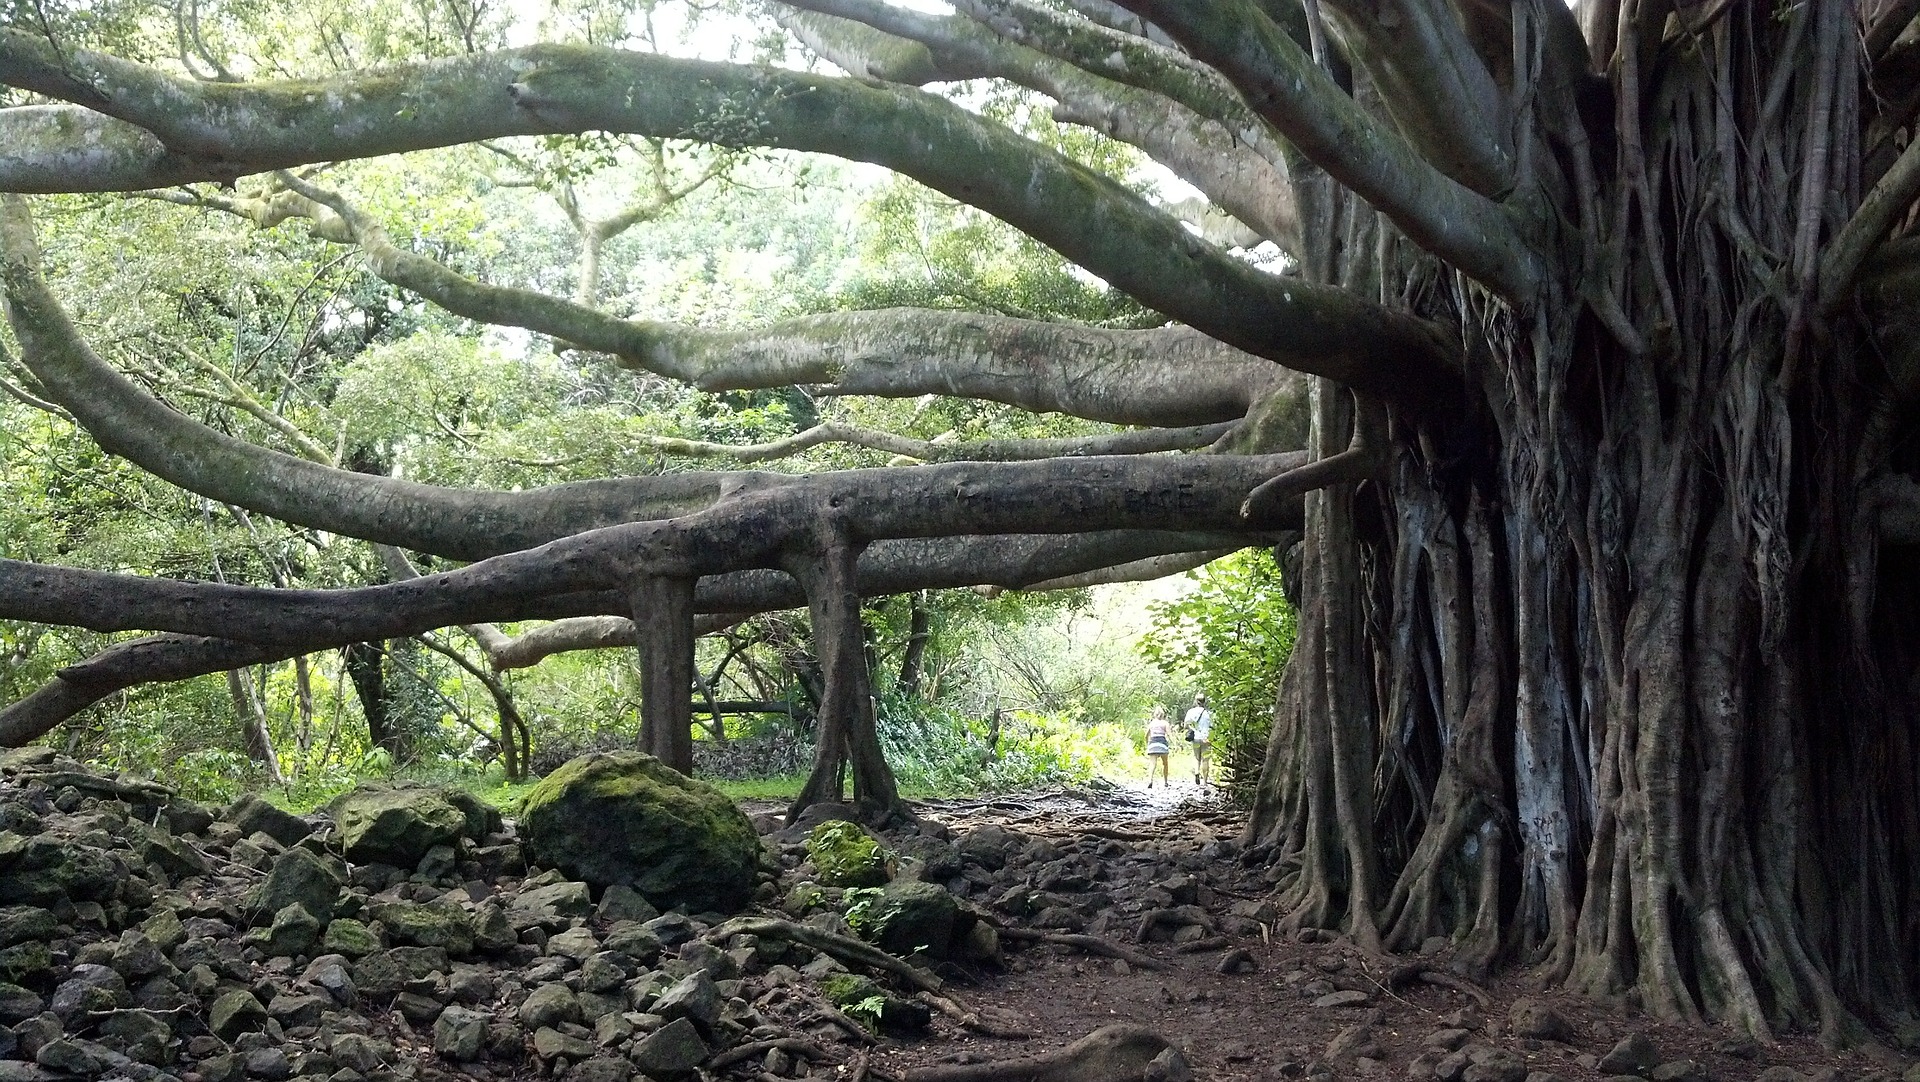 historical places to visit on oahu